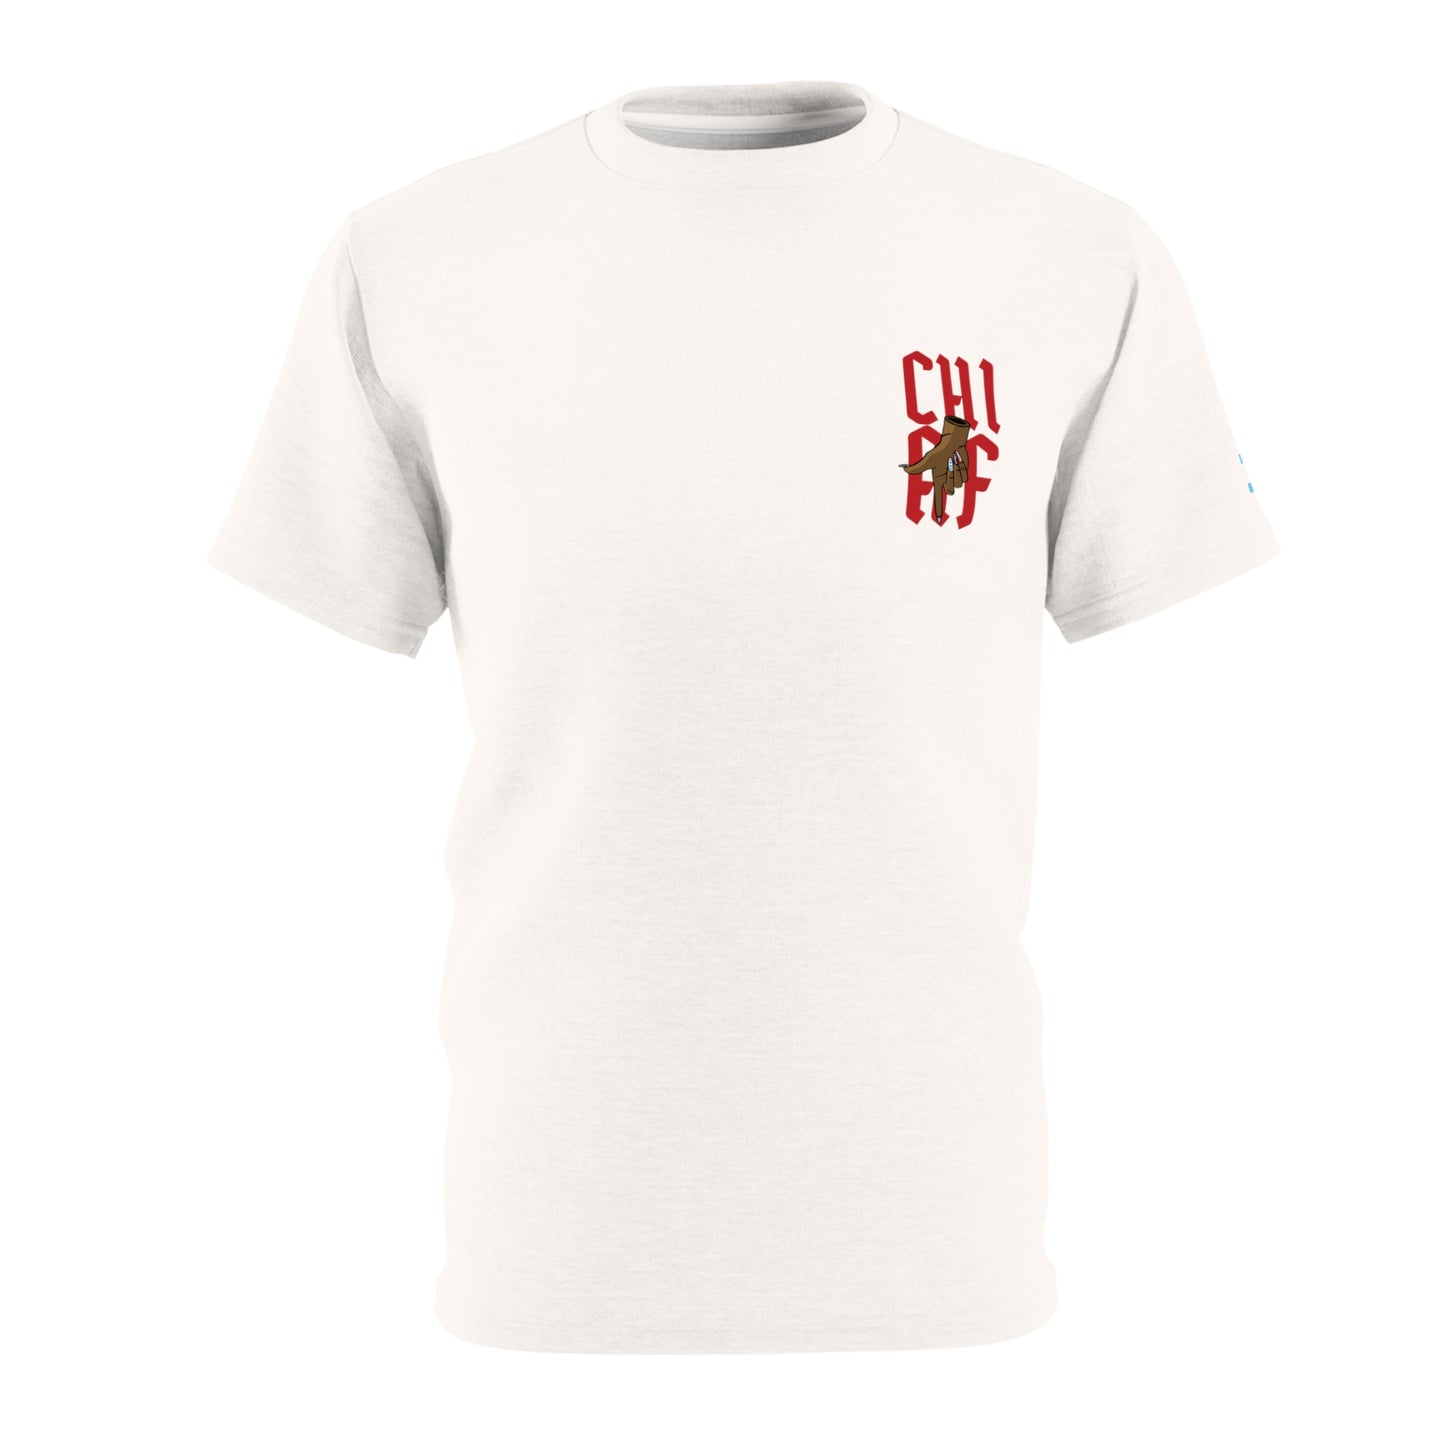 North Side Chicago Wife Shirt Red